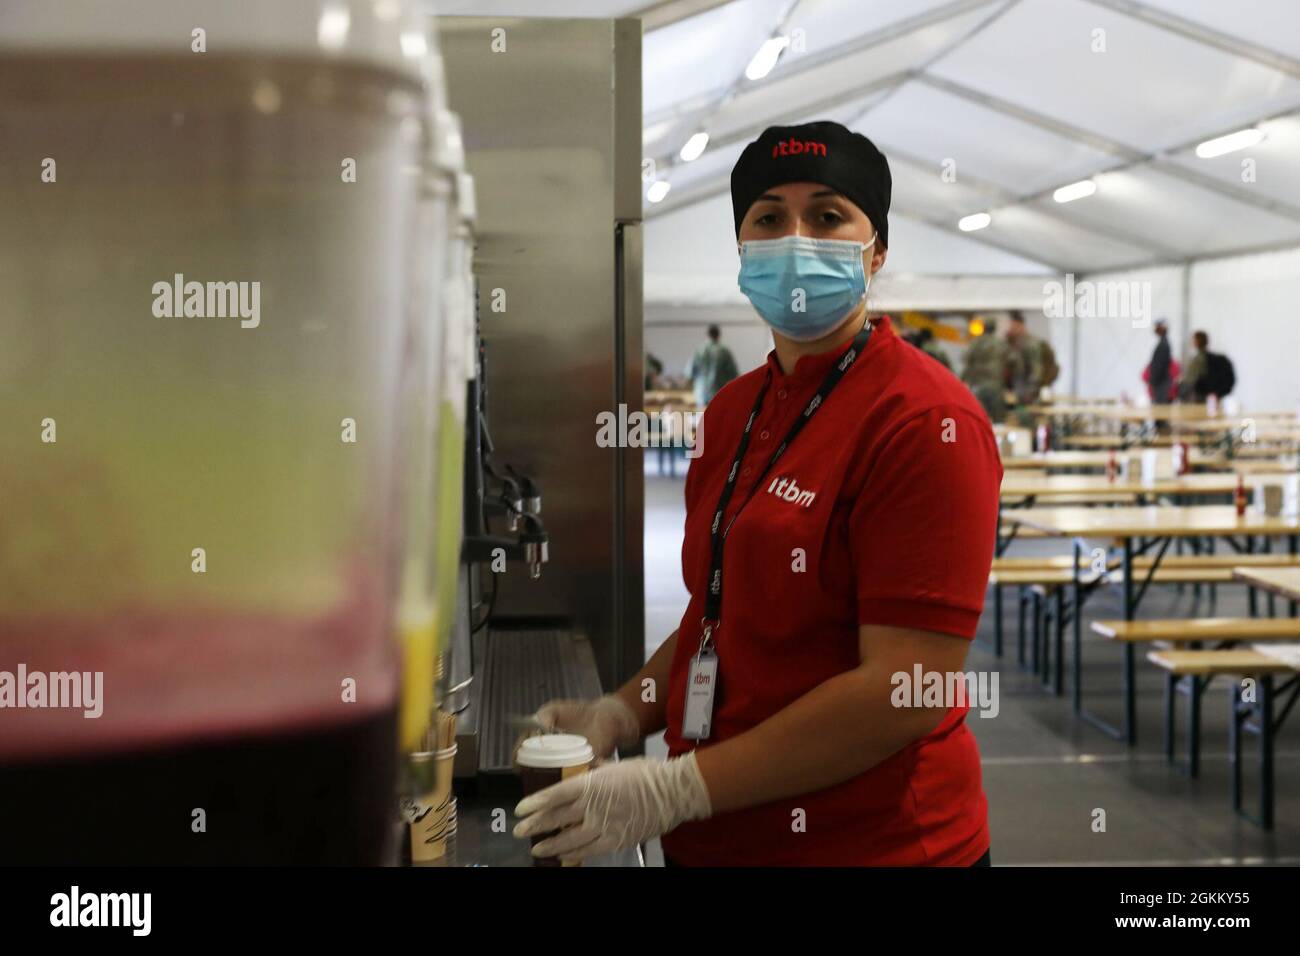 An Albanian food service worker pours a cup of coffee for a guest at a military dining facility May 21,2021, where Albanians and Americans work hand in hand to bring quality food to the American military personnel currently taking part in DEFENDER-Europe 21 training exercises  at Kucove Air Base, in Kucove/Berat, Albania.  DEFENDER-Europe 21 is a large-scale U.S. Army-led exercise designed to build readiness and interoperability between the U.S., NATO allies and partner militaries. This year, more than 28,000 multinational forces from 26 nations will conduct nearly simultaneous operations acro Stock Photo